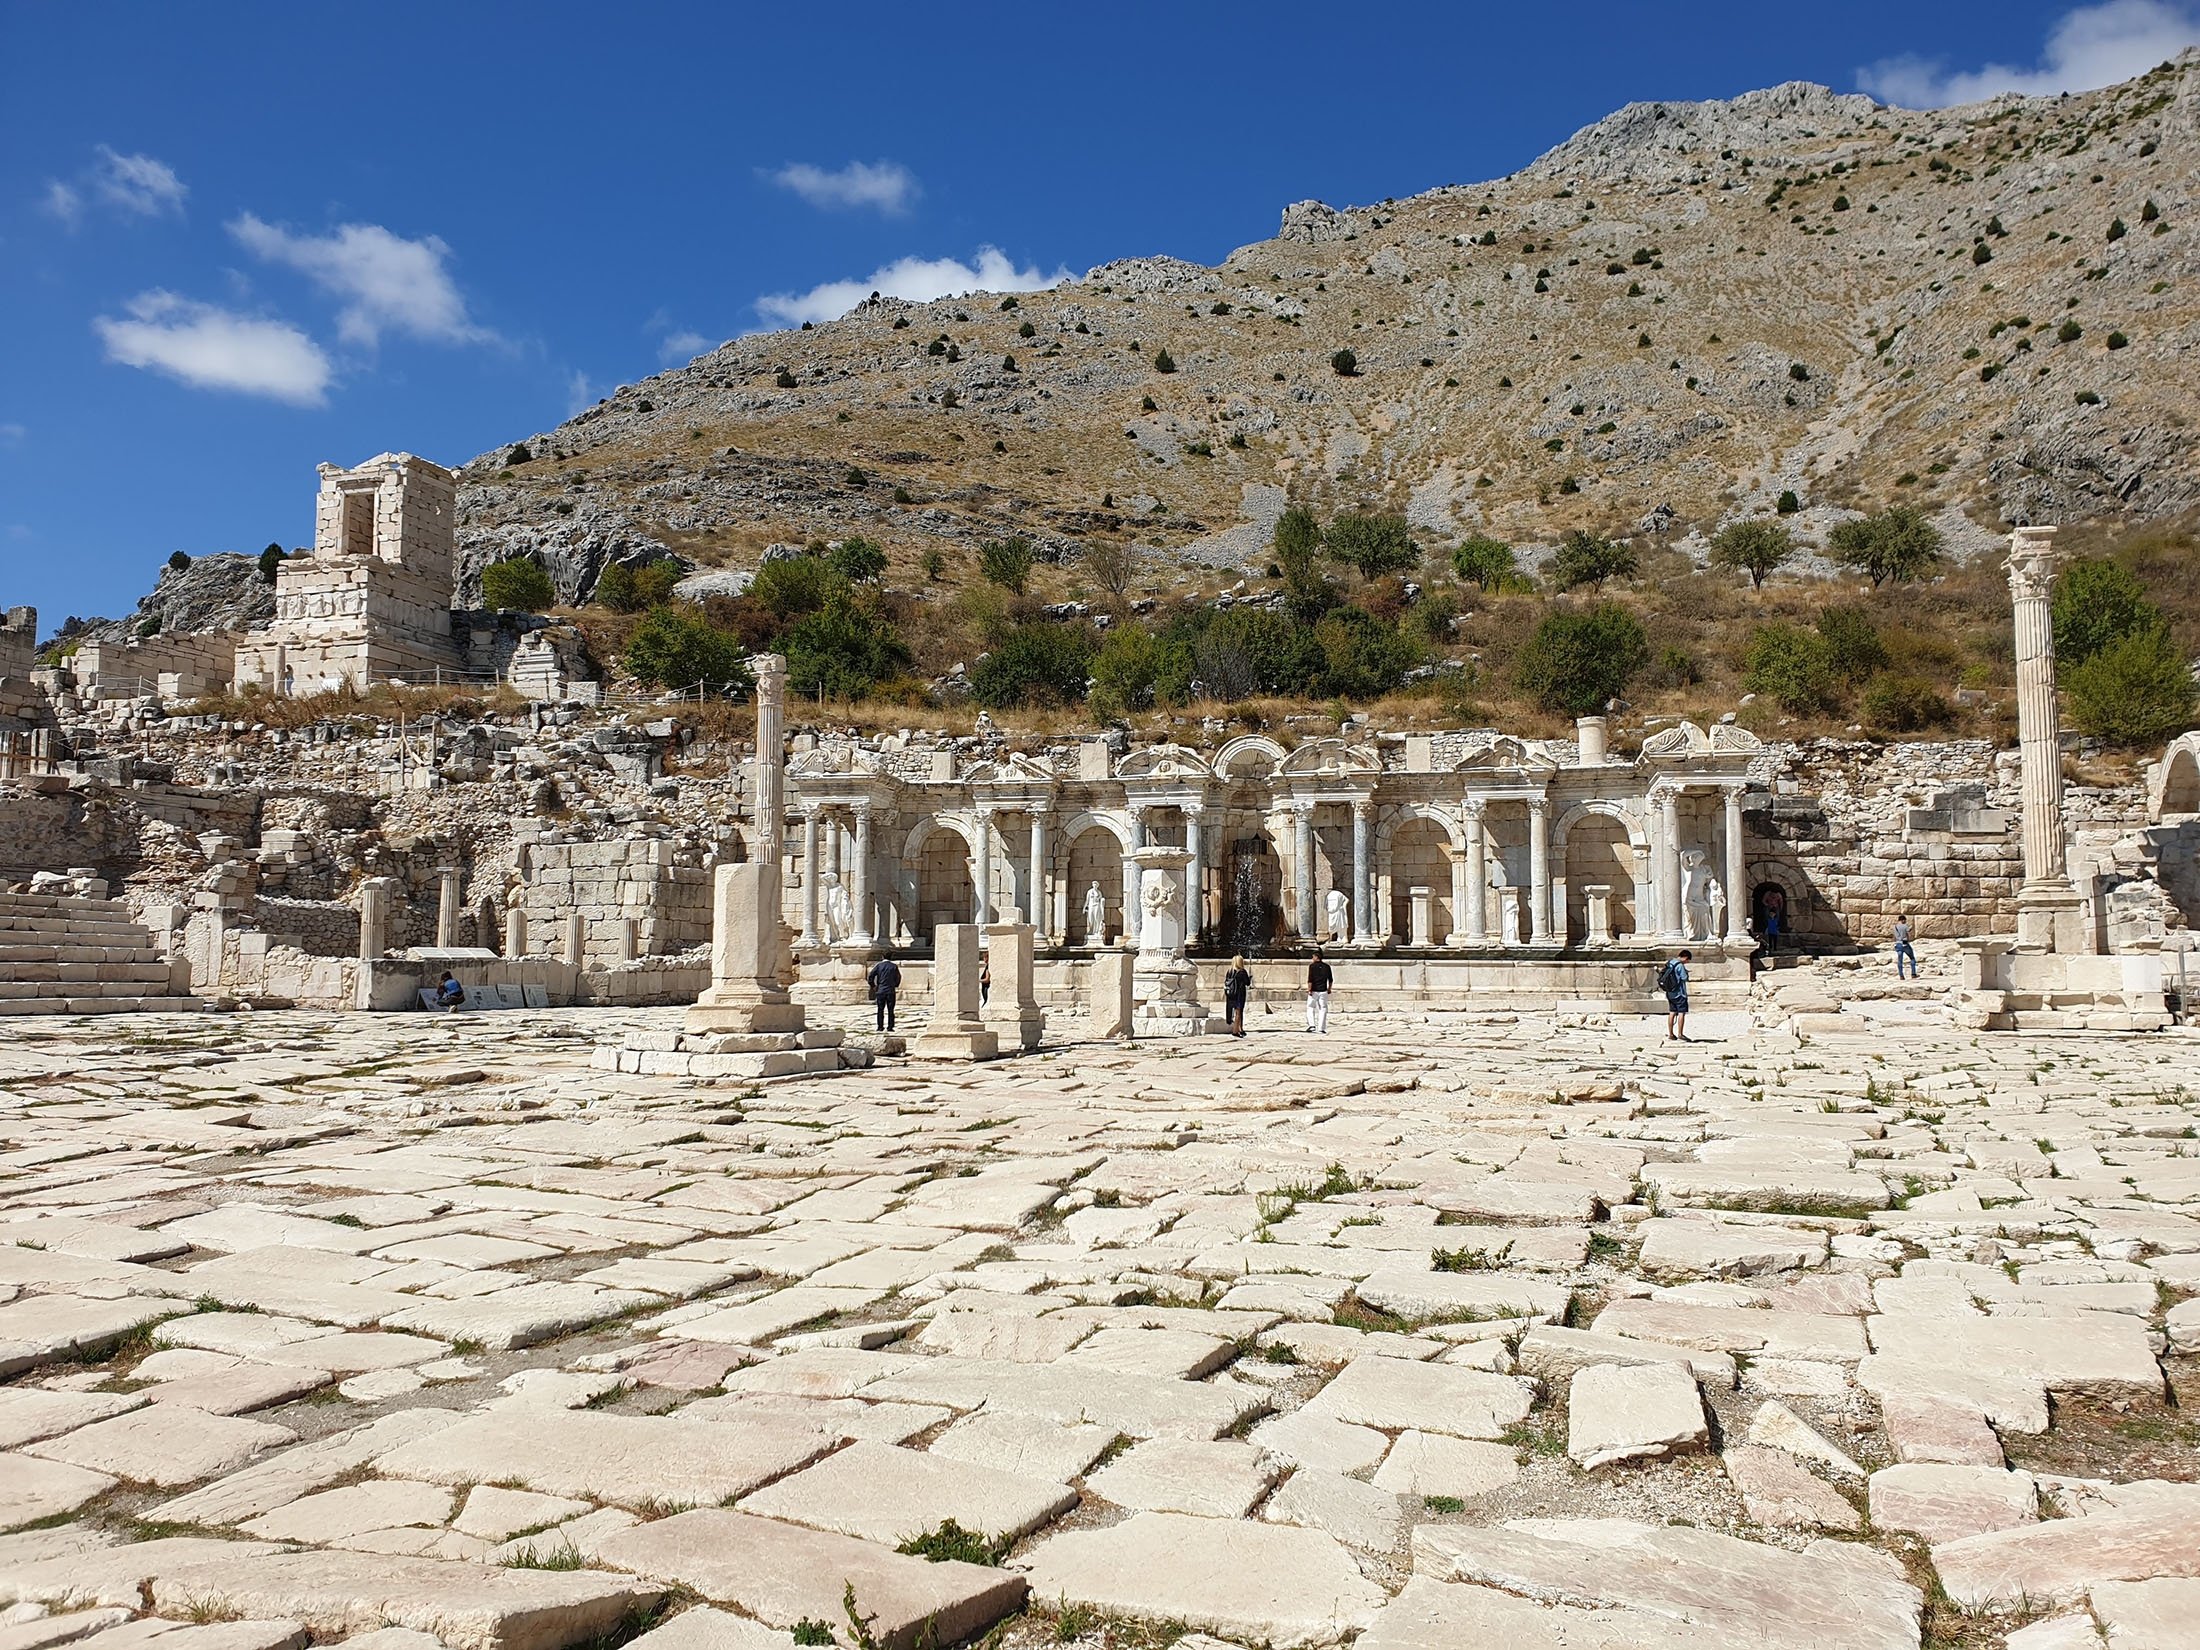 A stunning example of Greco-Roman architecture and beauty Sagalassos can be seen in the picture. (Photo by Argun Konuk)